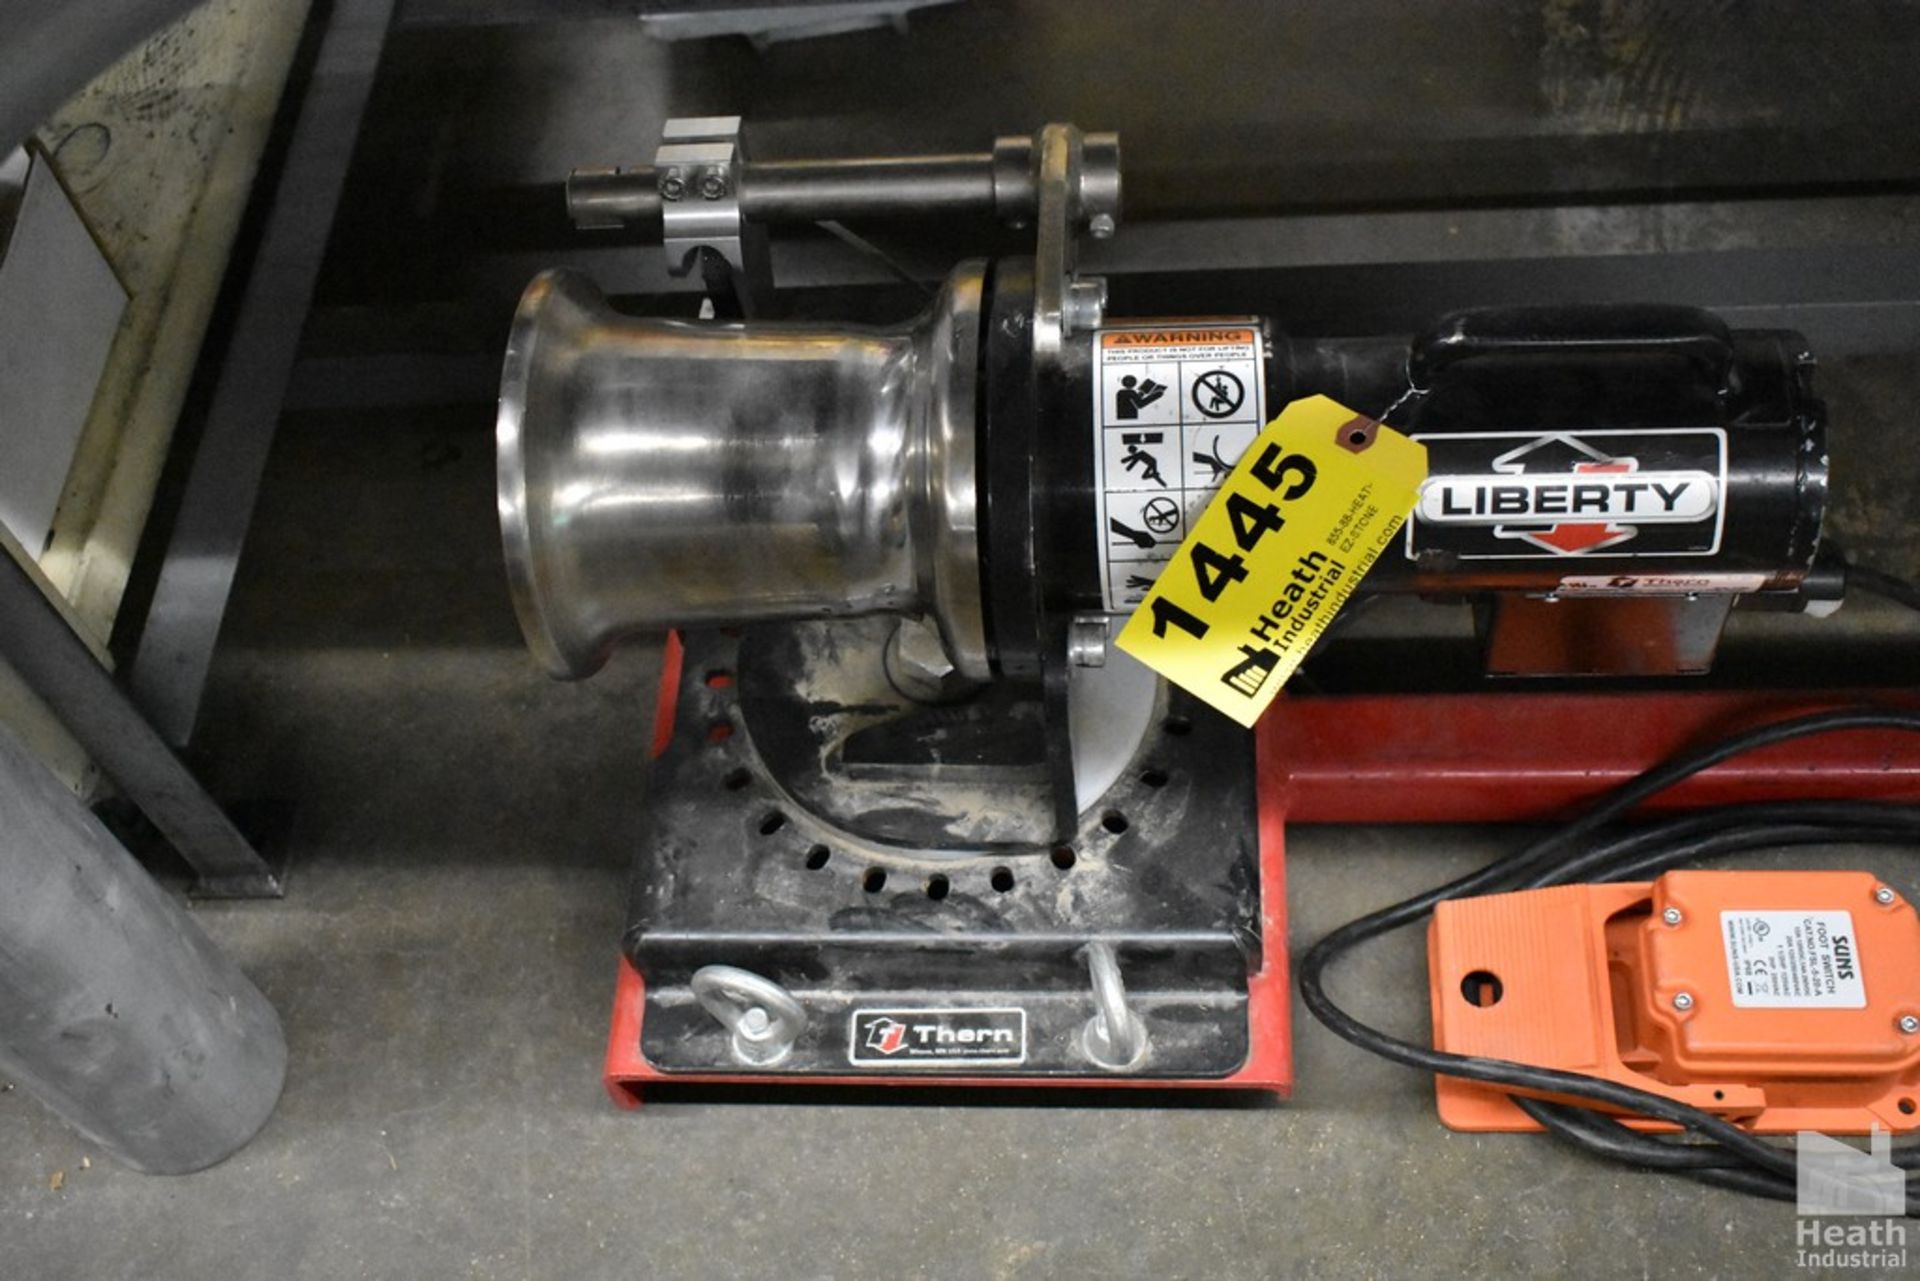 PORTABLE LIBERTY CAPSTAN POWER WINCH - 1000 LB CAPACITY - THERN - Image 2 of 2